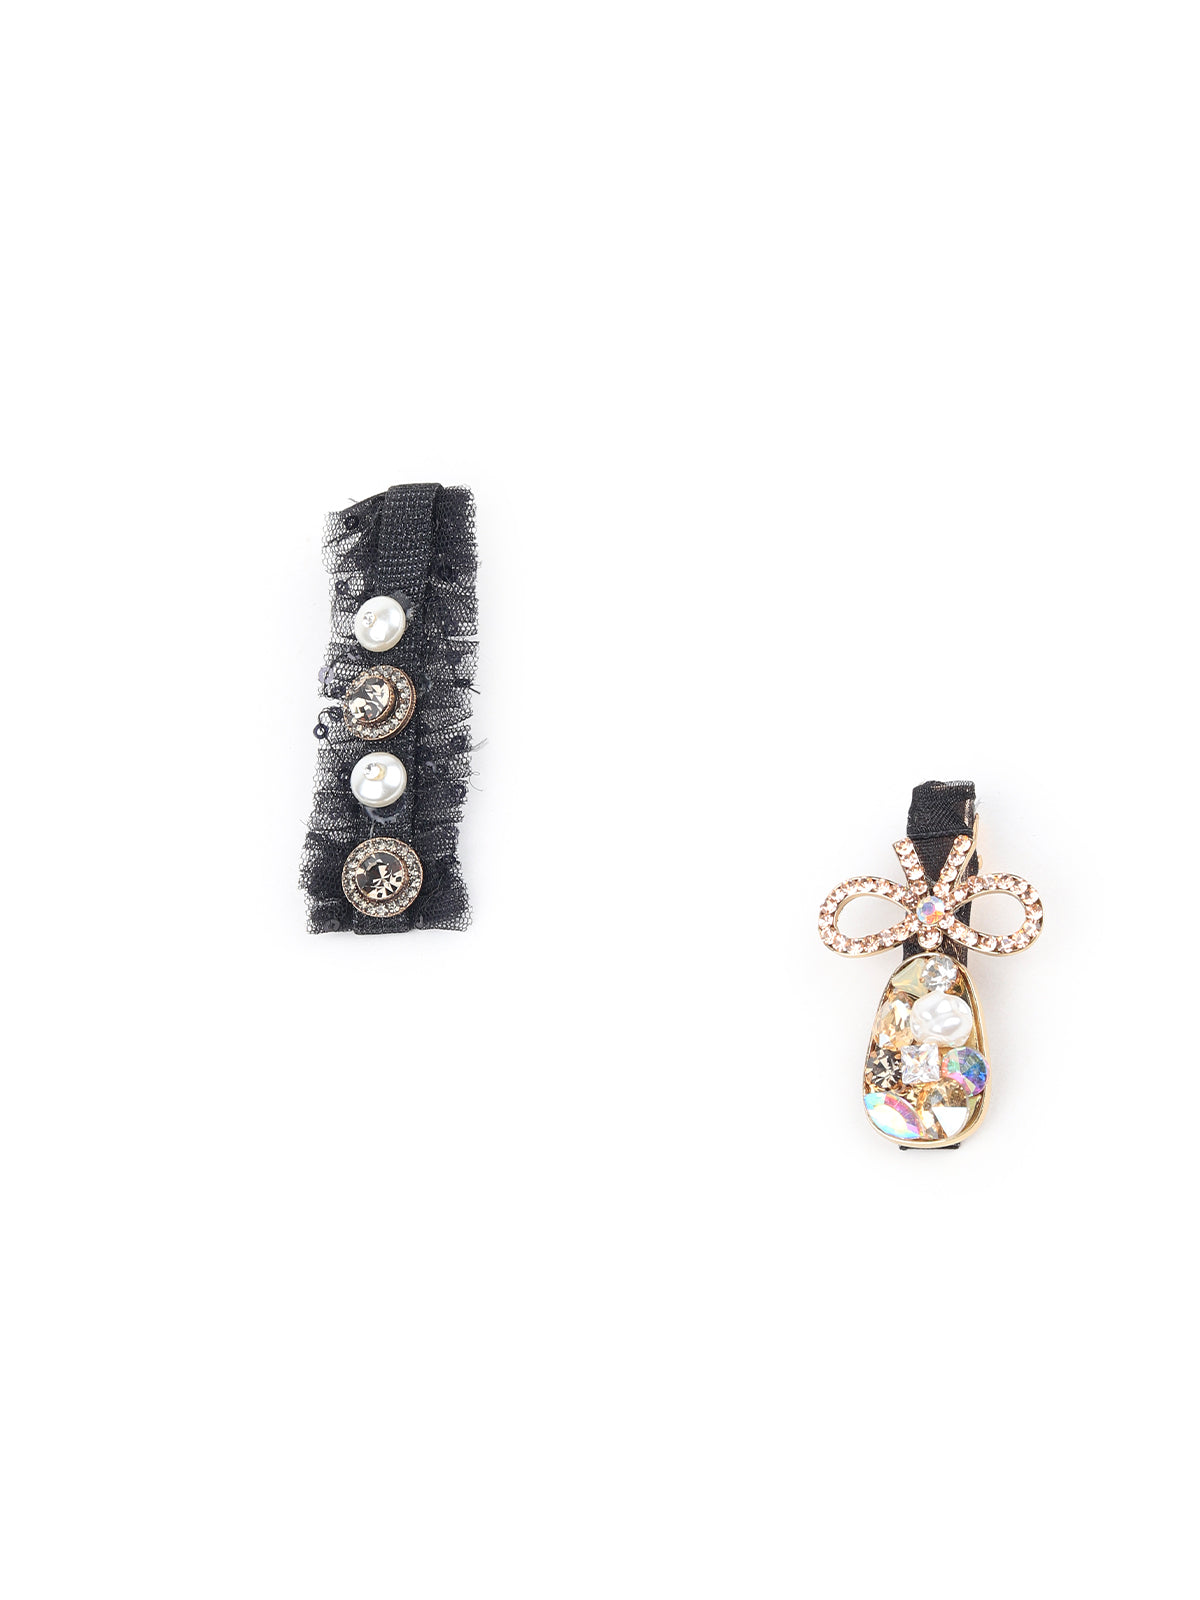 Black lace and stoned brooch for women